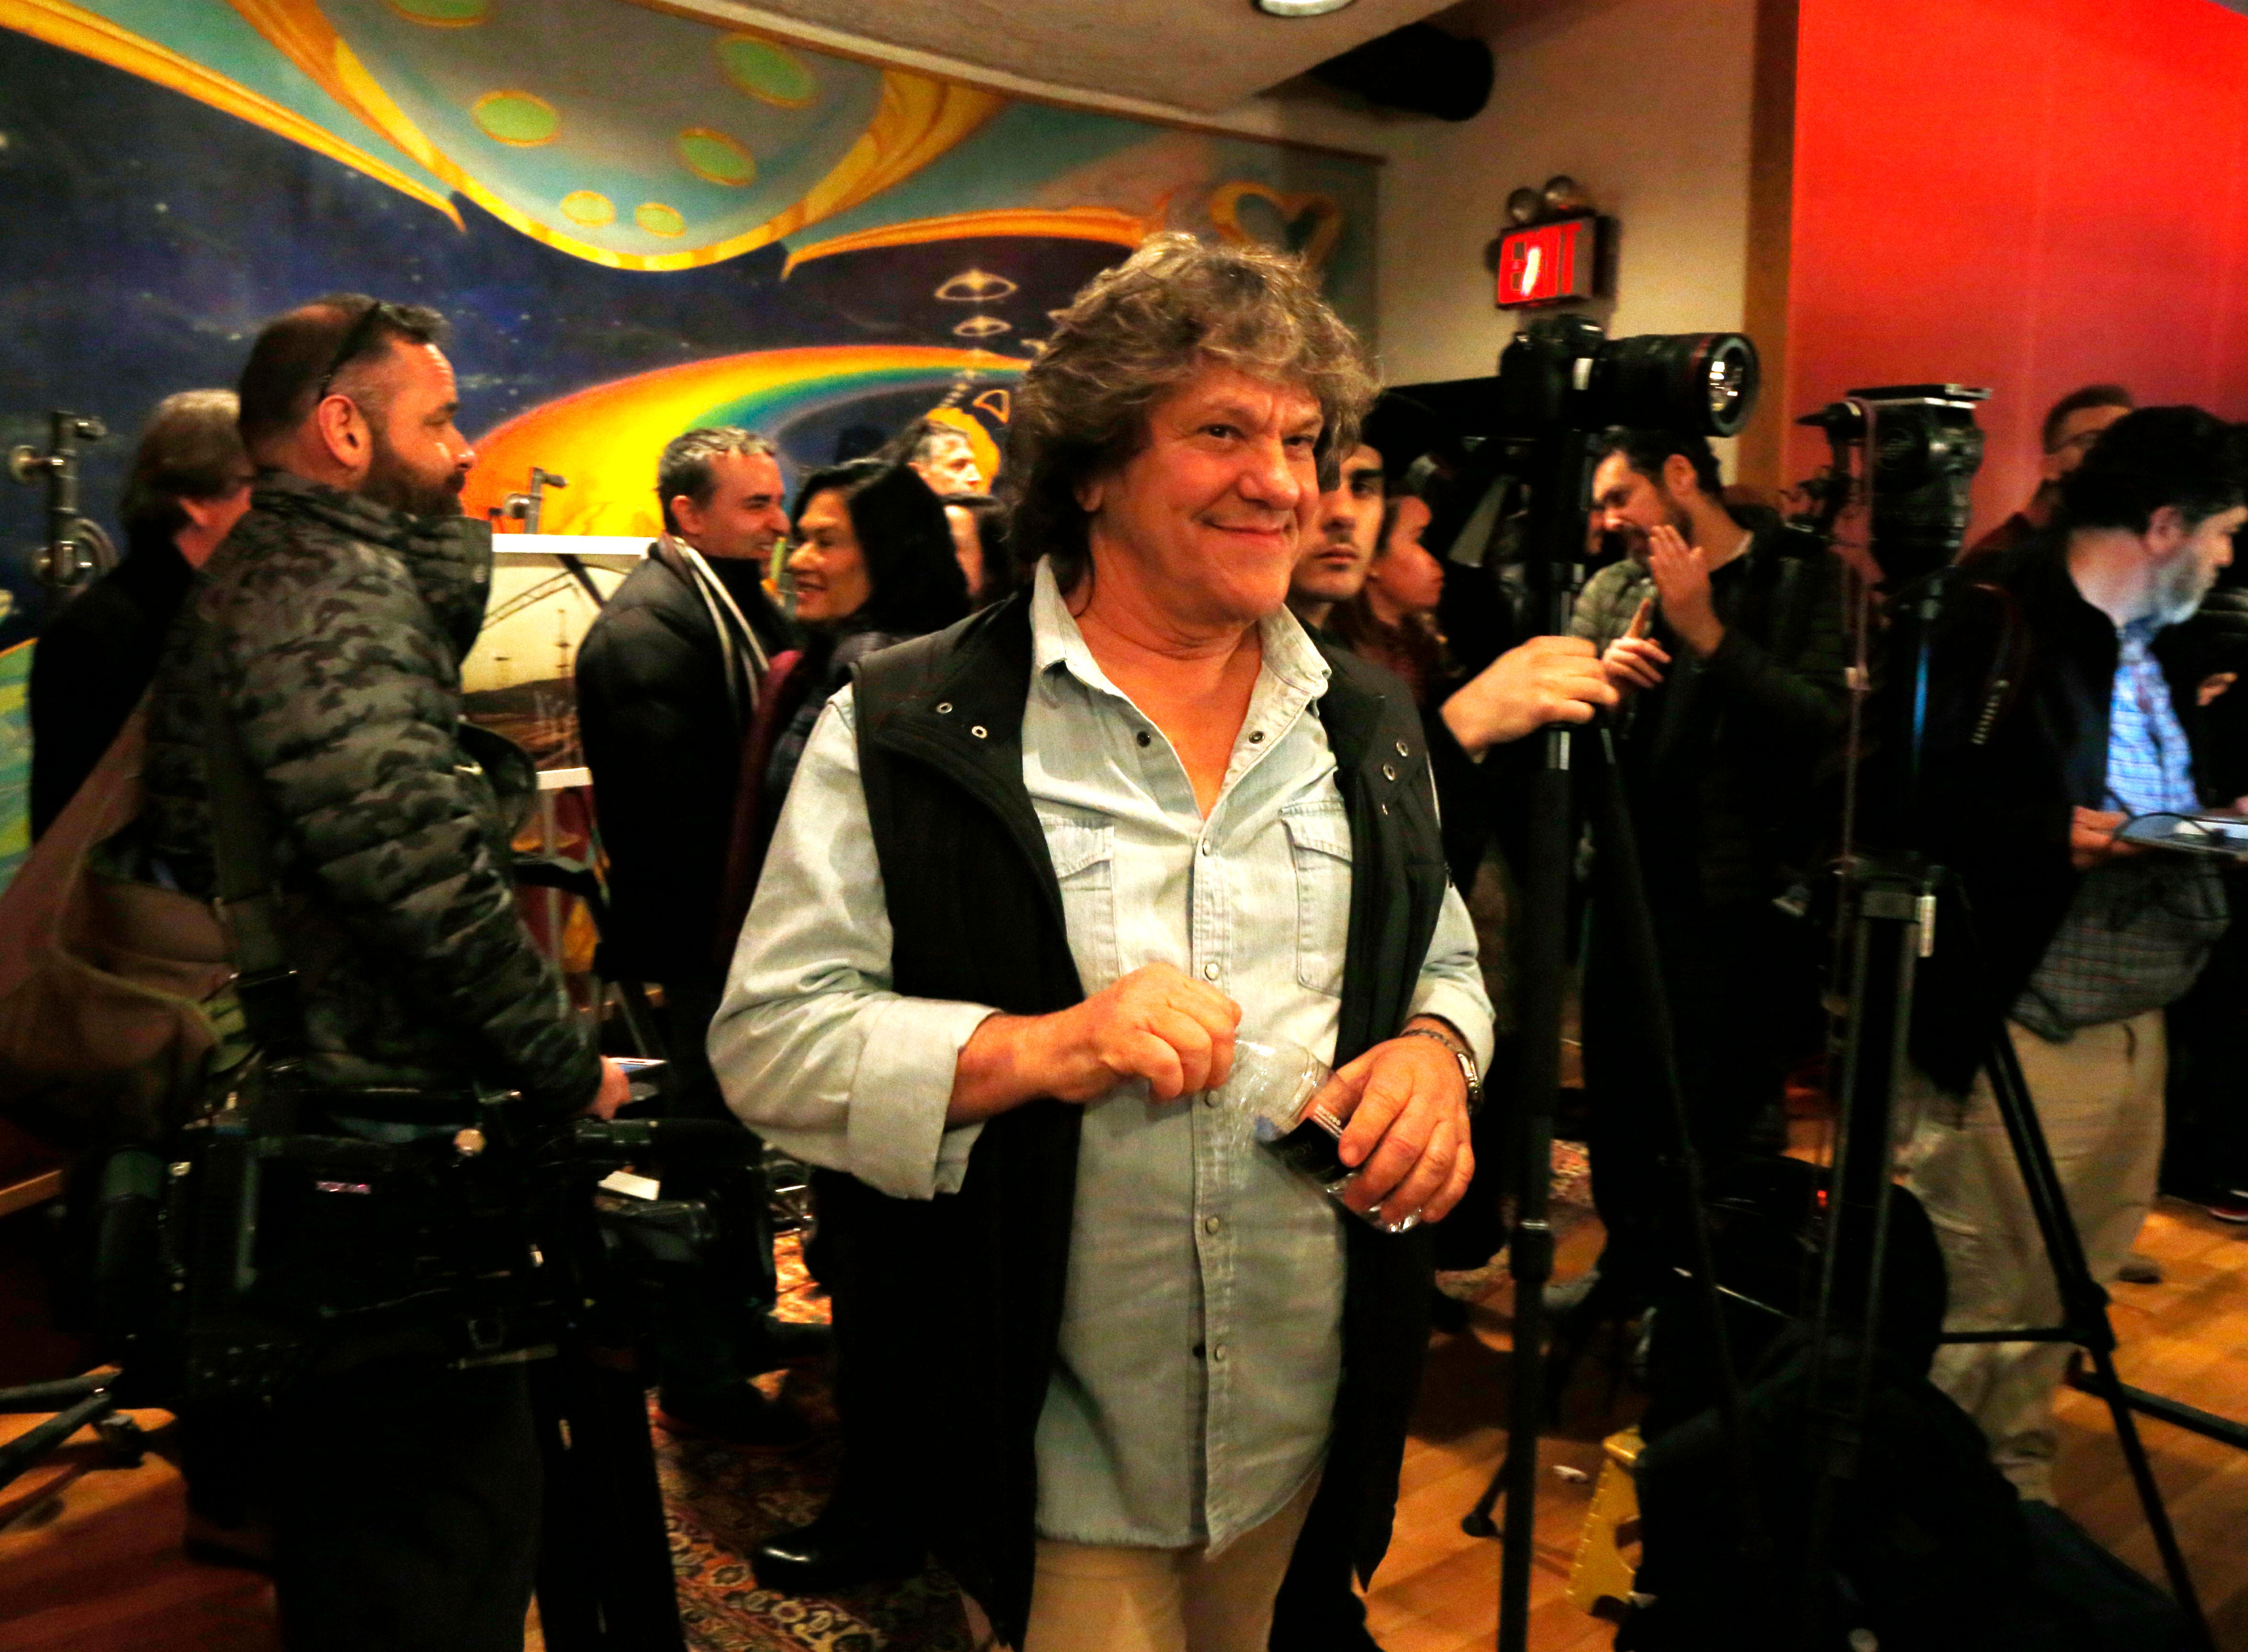 Michael Lang following the announcement of the Woodstock 50 line up at Electric Lady Studios in New York City on March 19, 2019.